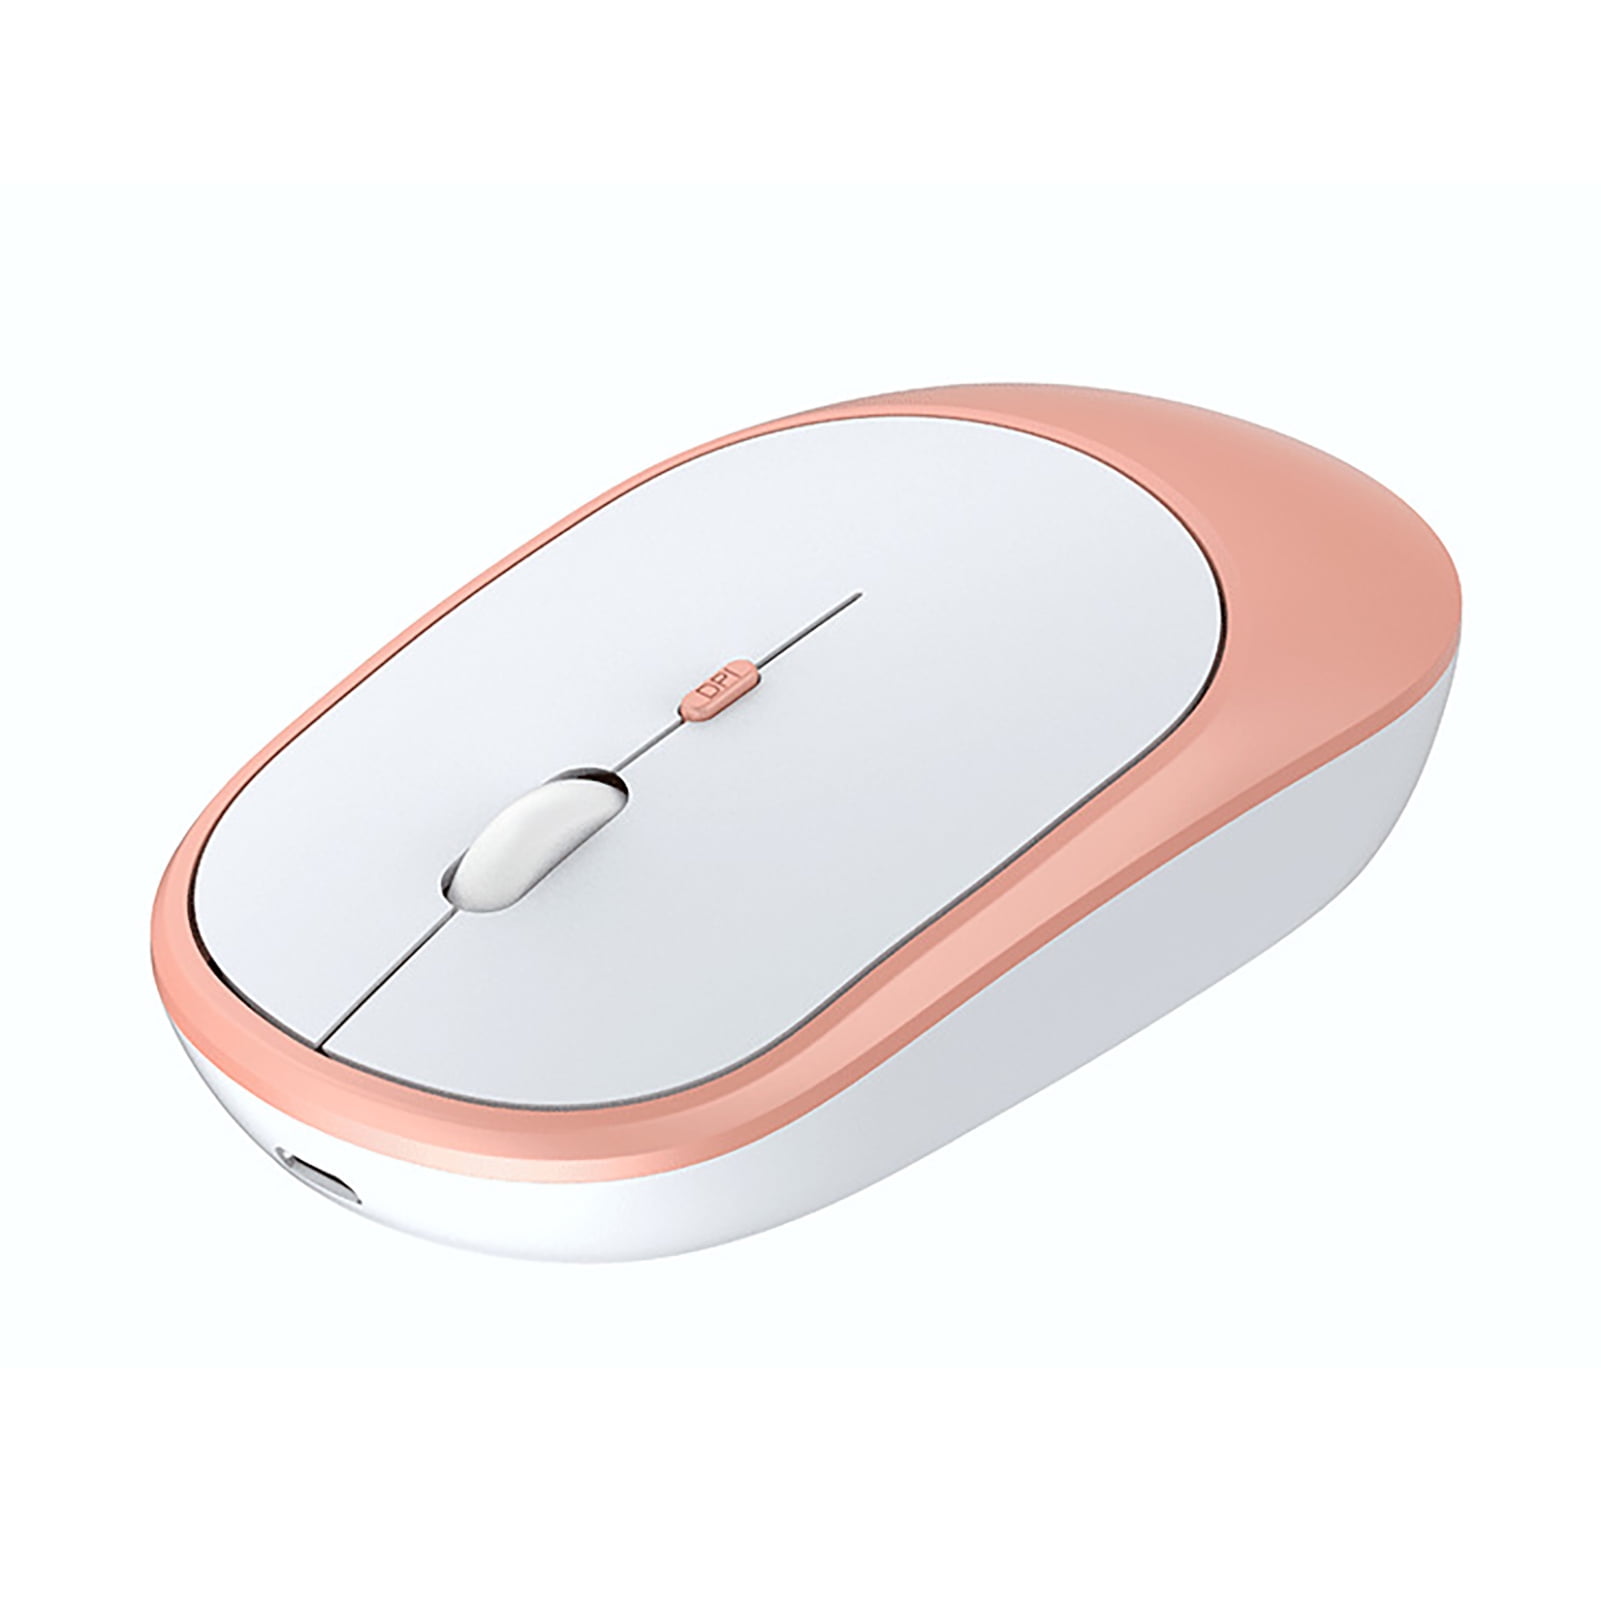 Smitsom Minearbejder satellit Visland Multi-Device Bluetooth Mouse Quick Response Long Standby Time Slim  Tablet Noiseless Mini Mouse – Windows, Mac, Chrome OS, Android, iPad,  iPhone, Apple TV Compatible - Walmart.com